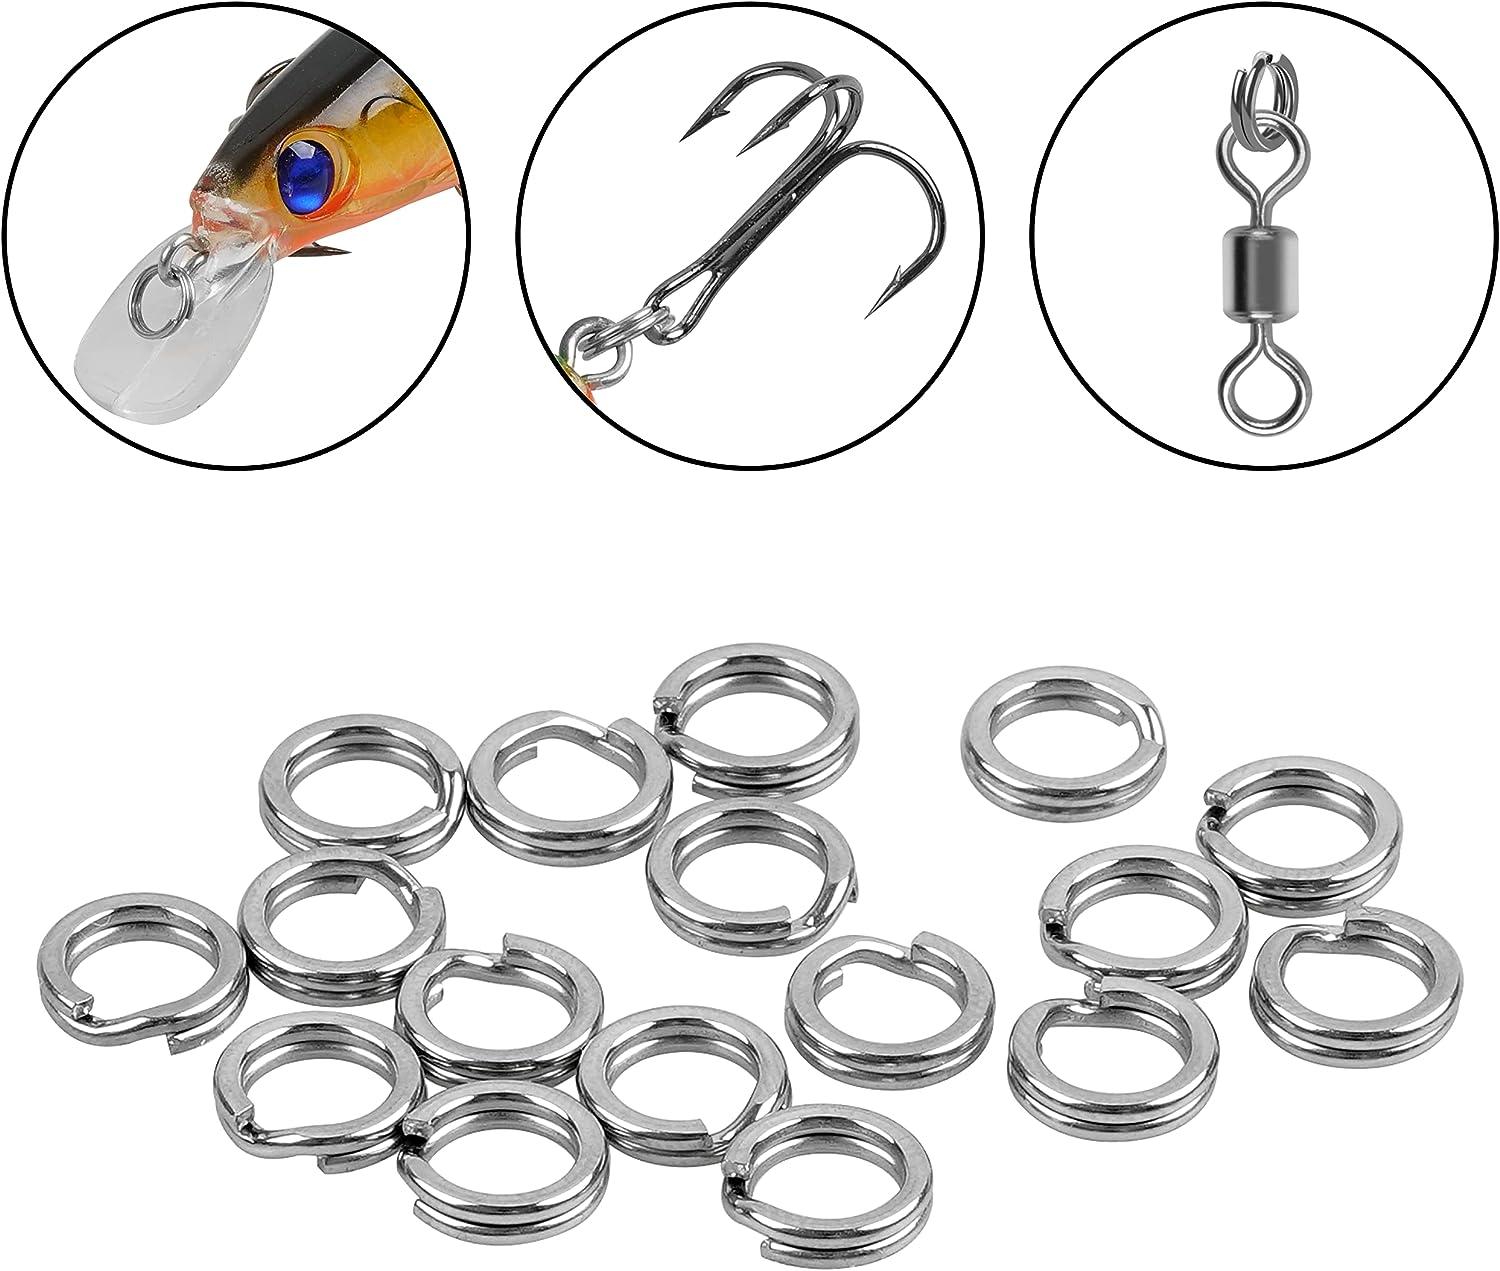 Hilitchi 210pcs [9-Sizes] Stainless Steel Fishing Split Rings Fishing Tackle Ring Chain High Strength Heavy Fishing Lures Connec, Stainless Steel